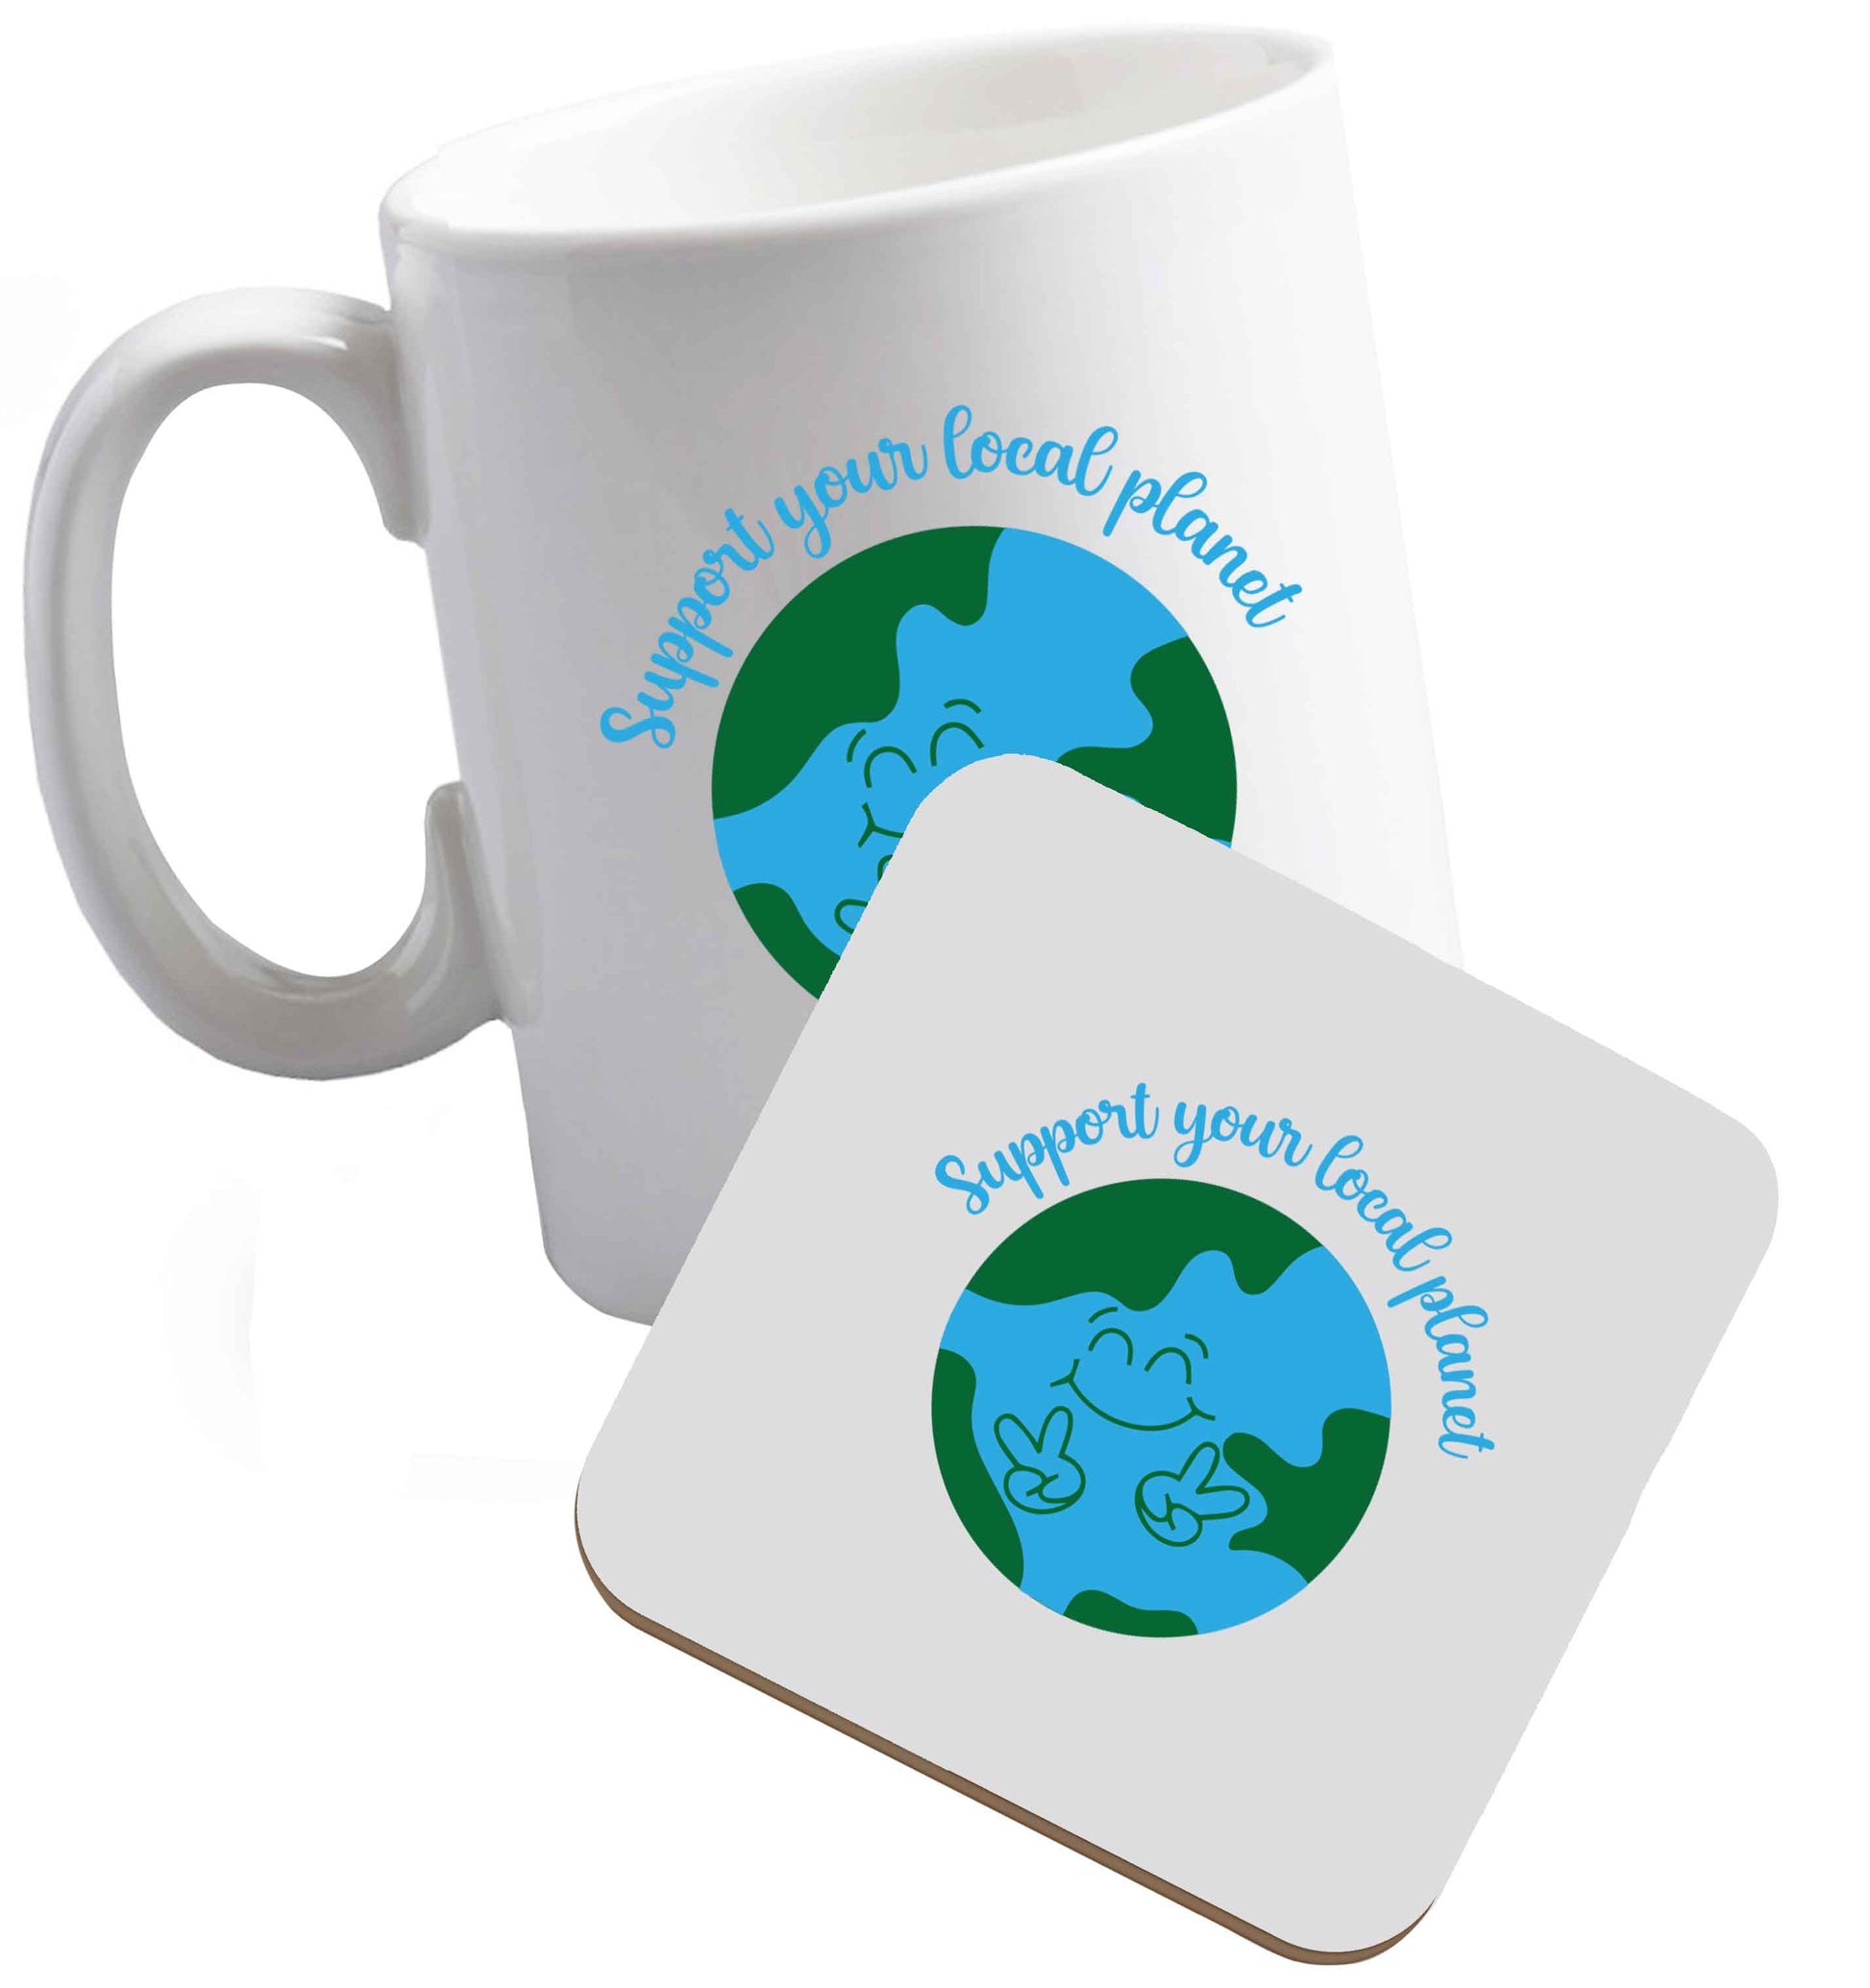 10 oz Support your local planet ceramic mug and coaster set right handed